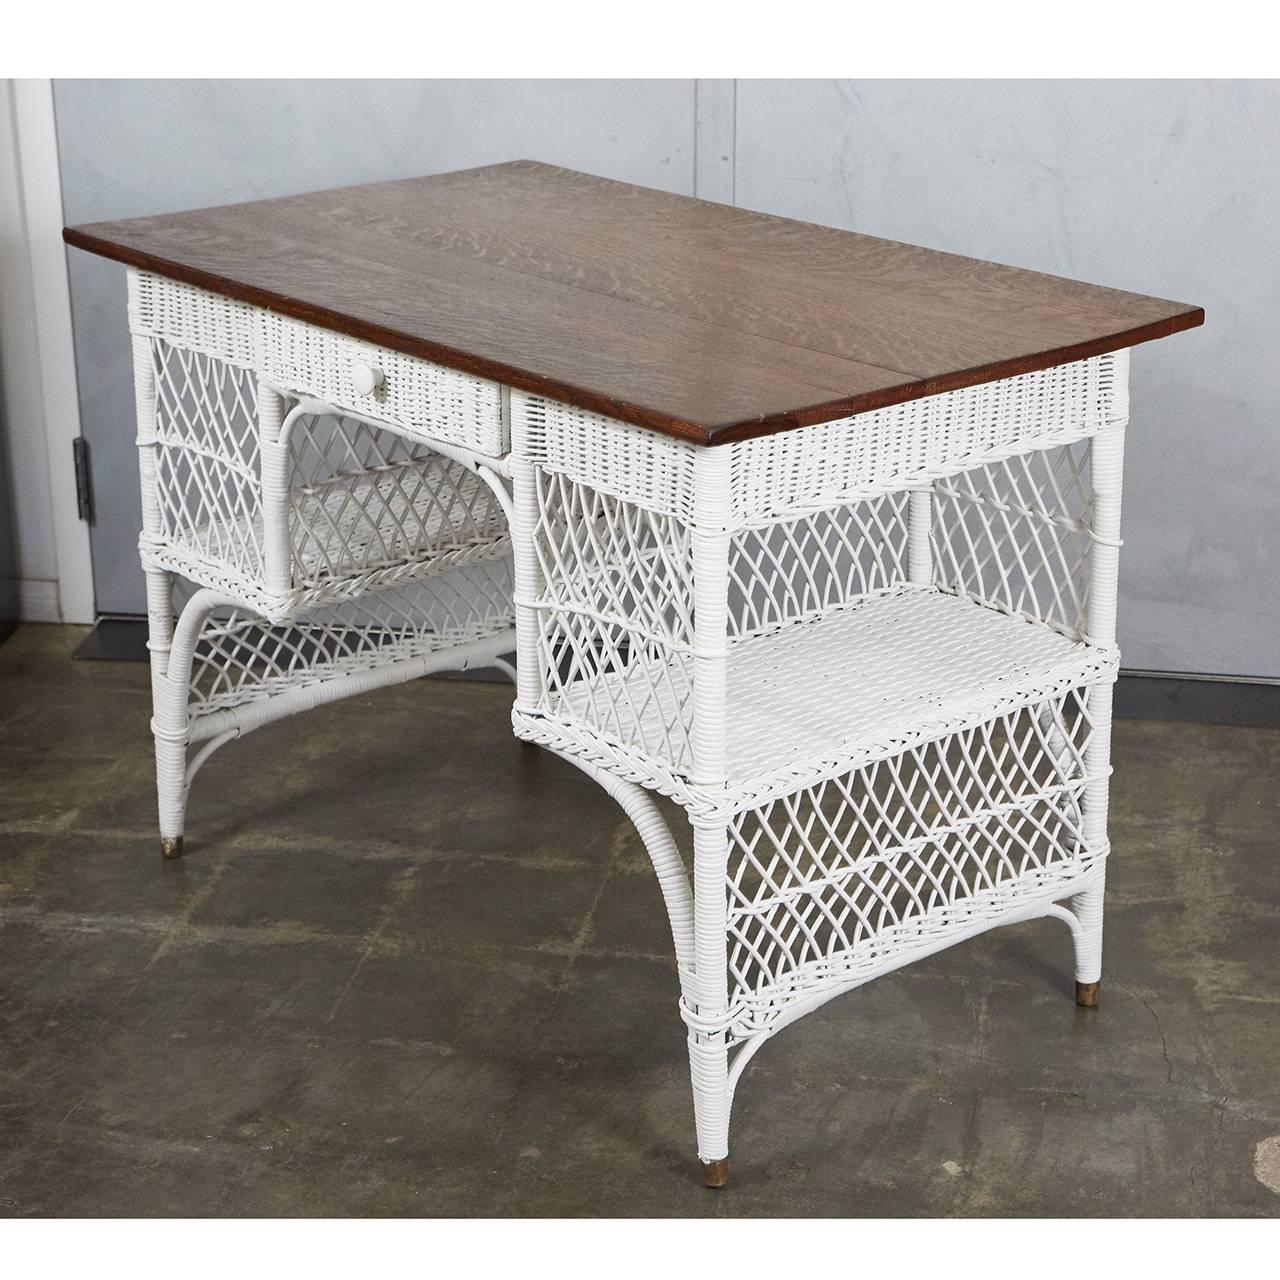 This wonderful example of wicker furniture from the 1920s is made of woven reed with a wood frame and oak desk surface. It has lattice patterned sides with side opening for two shelves. The piece has one drawer with a turned wood knob and the brass